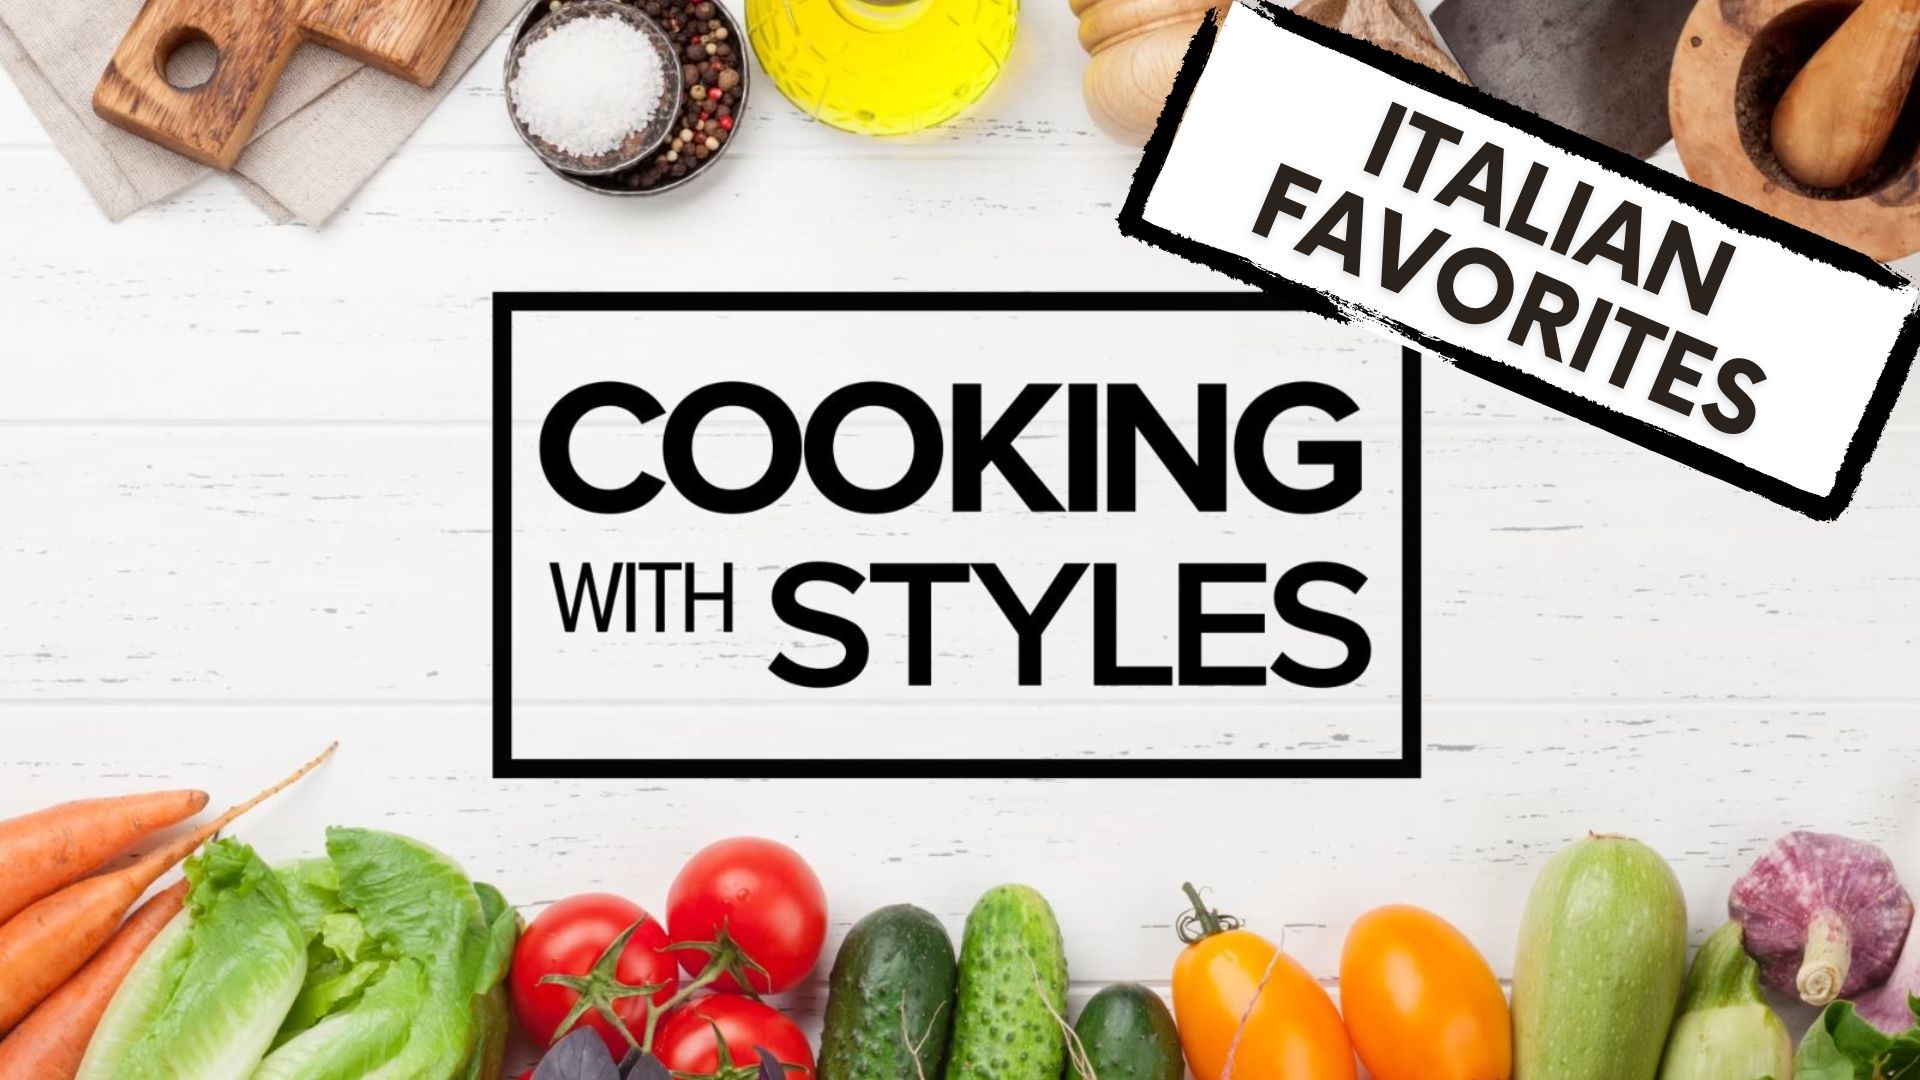 KFMB's Shawn Styles shares recipes for some favorite Italian dishes. From eggplant parmesan to gnocchi and rigatoni con vodka sauce, there is something for everyone.